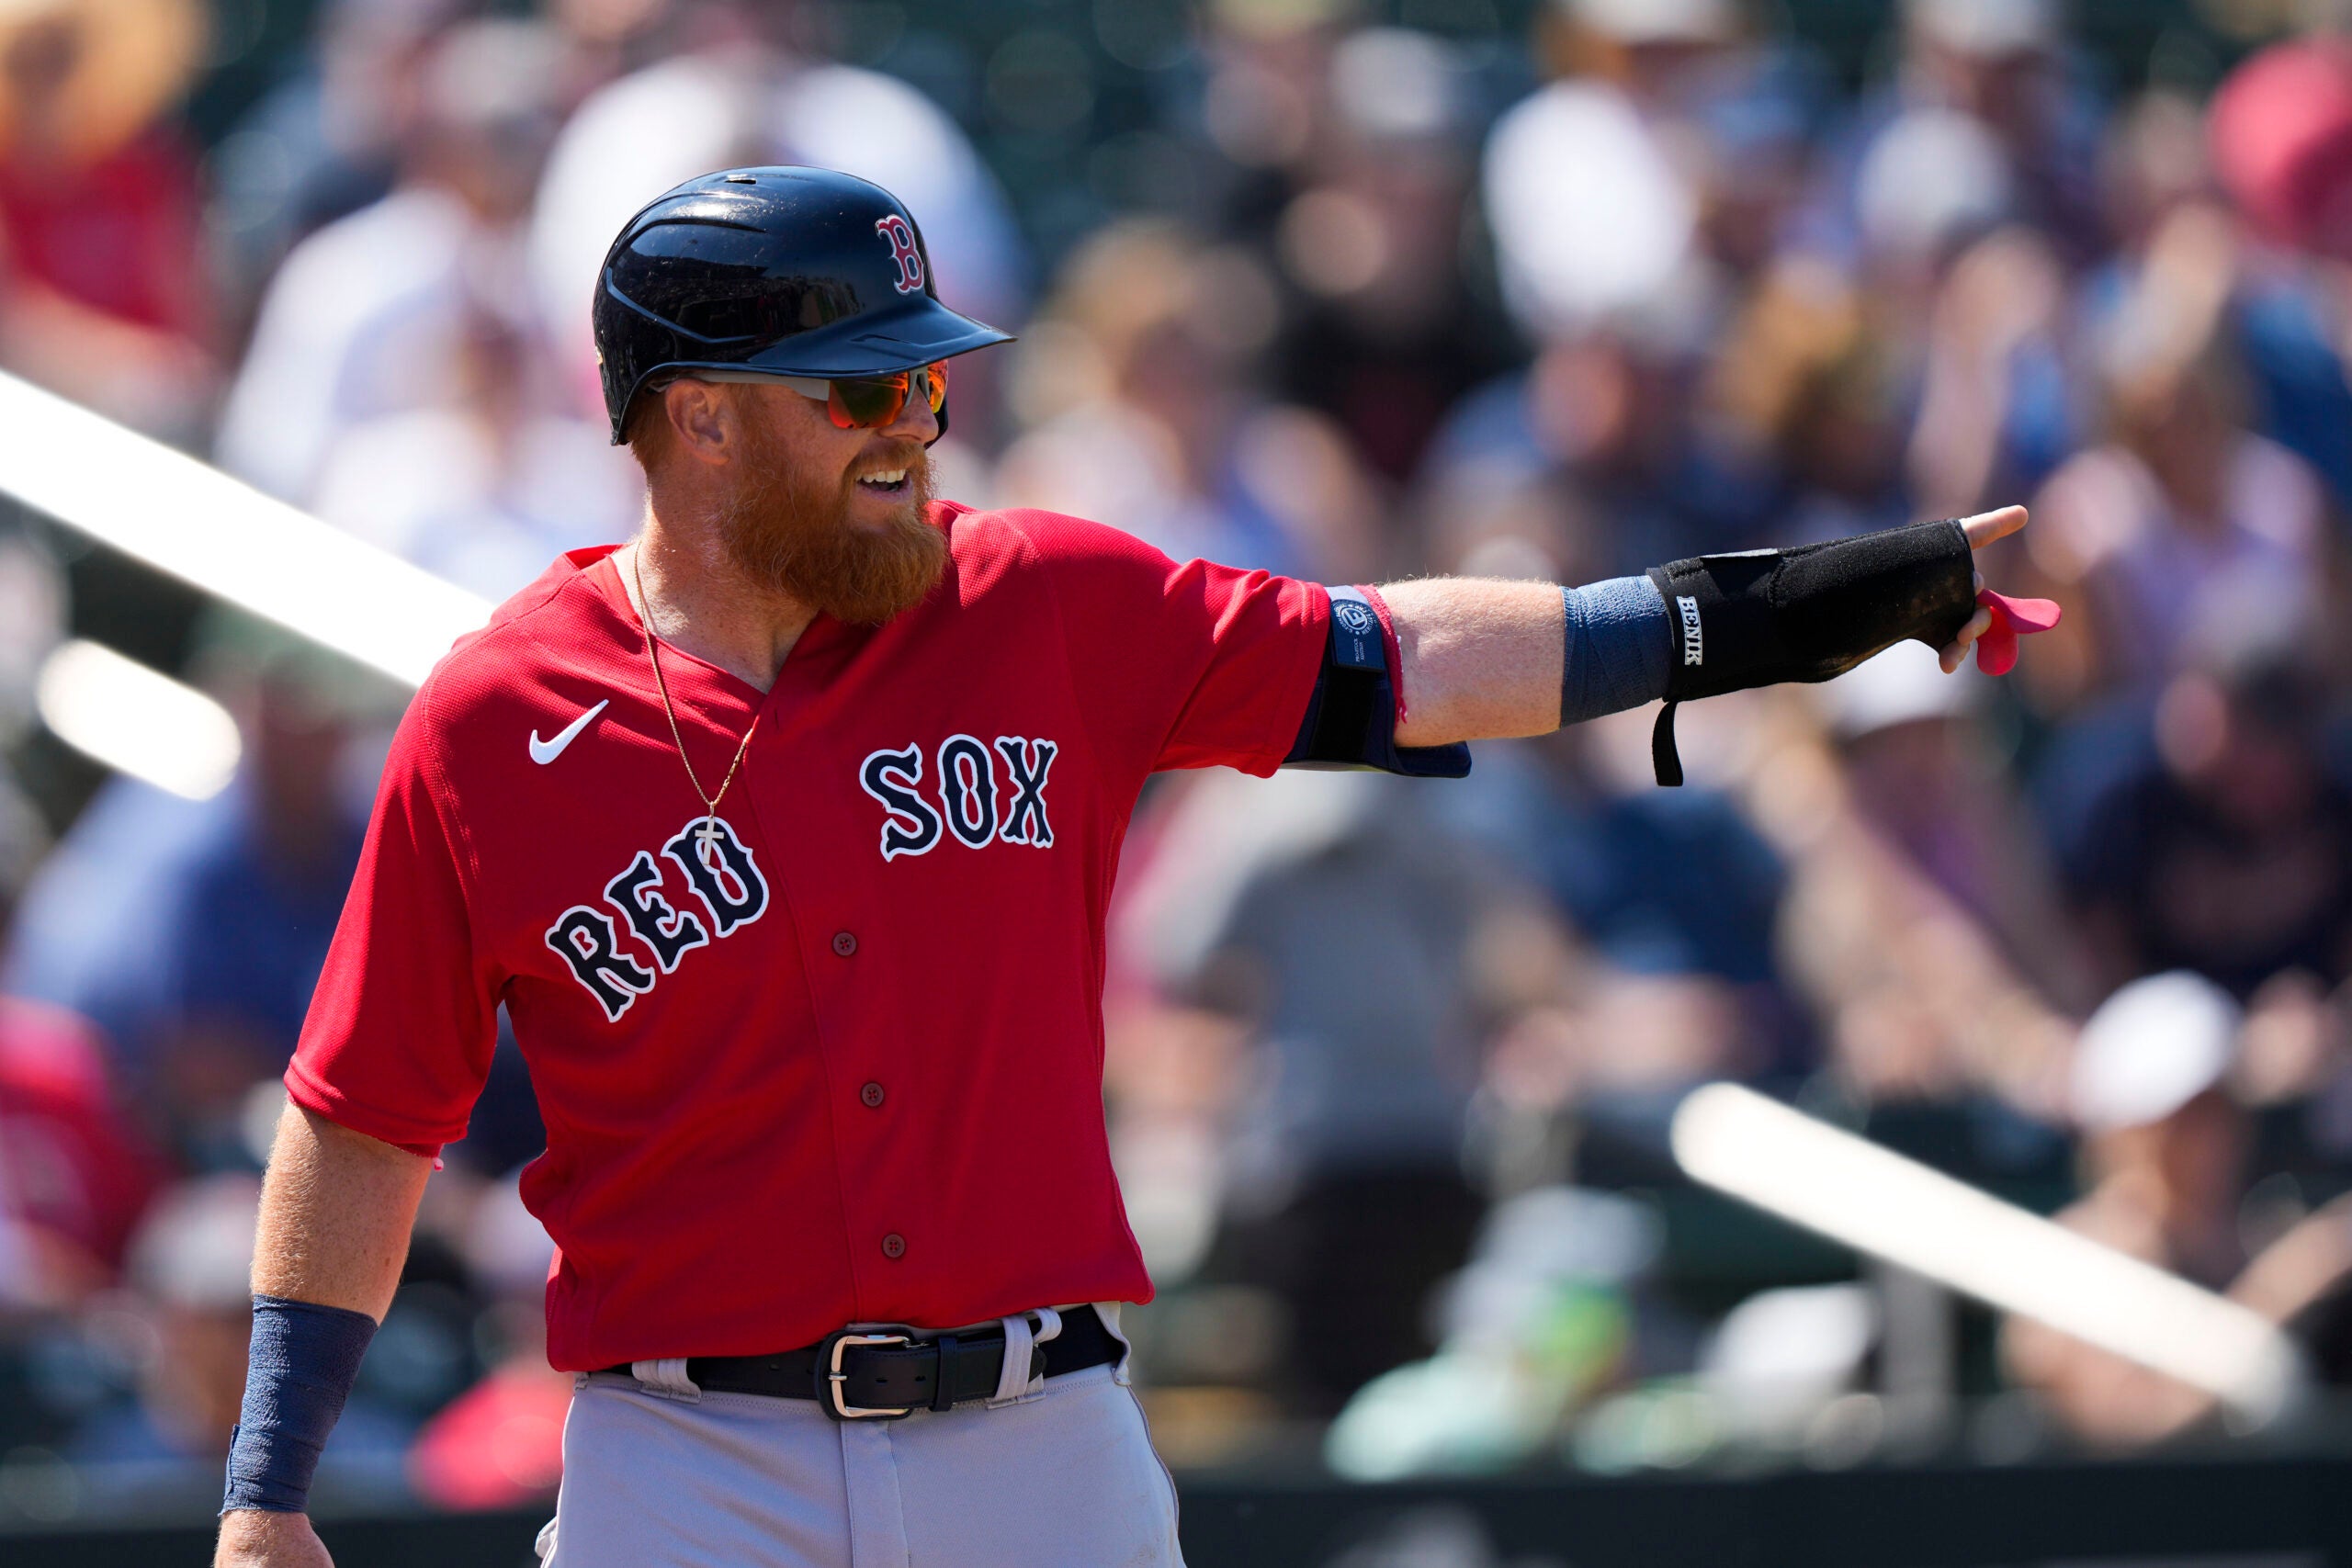 Justin Turner is predicted to be amongst the Red Sox best players this year.